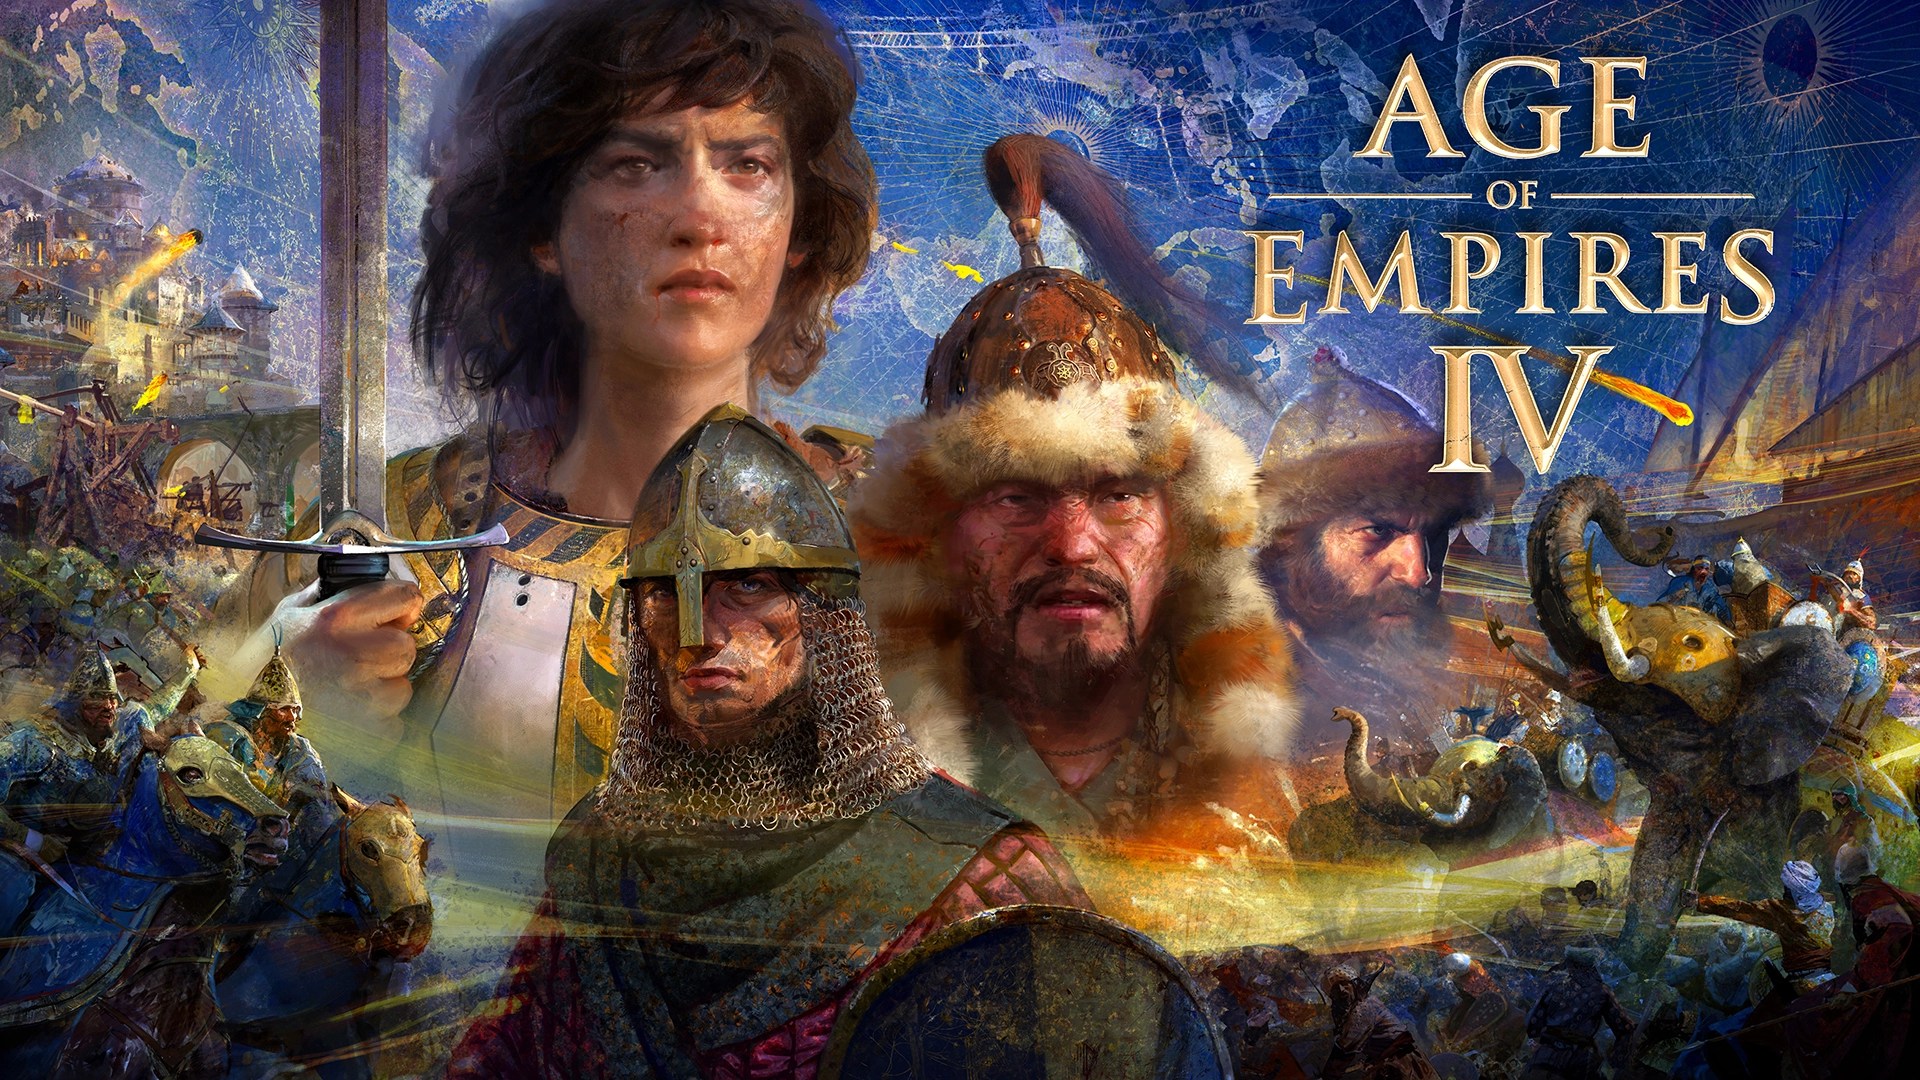 Age of Empires 4 art